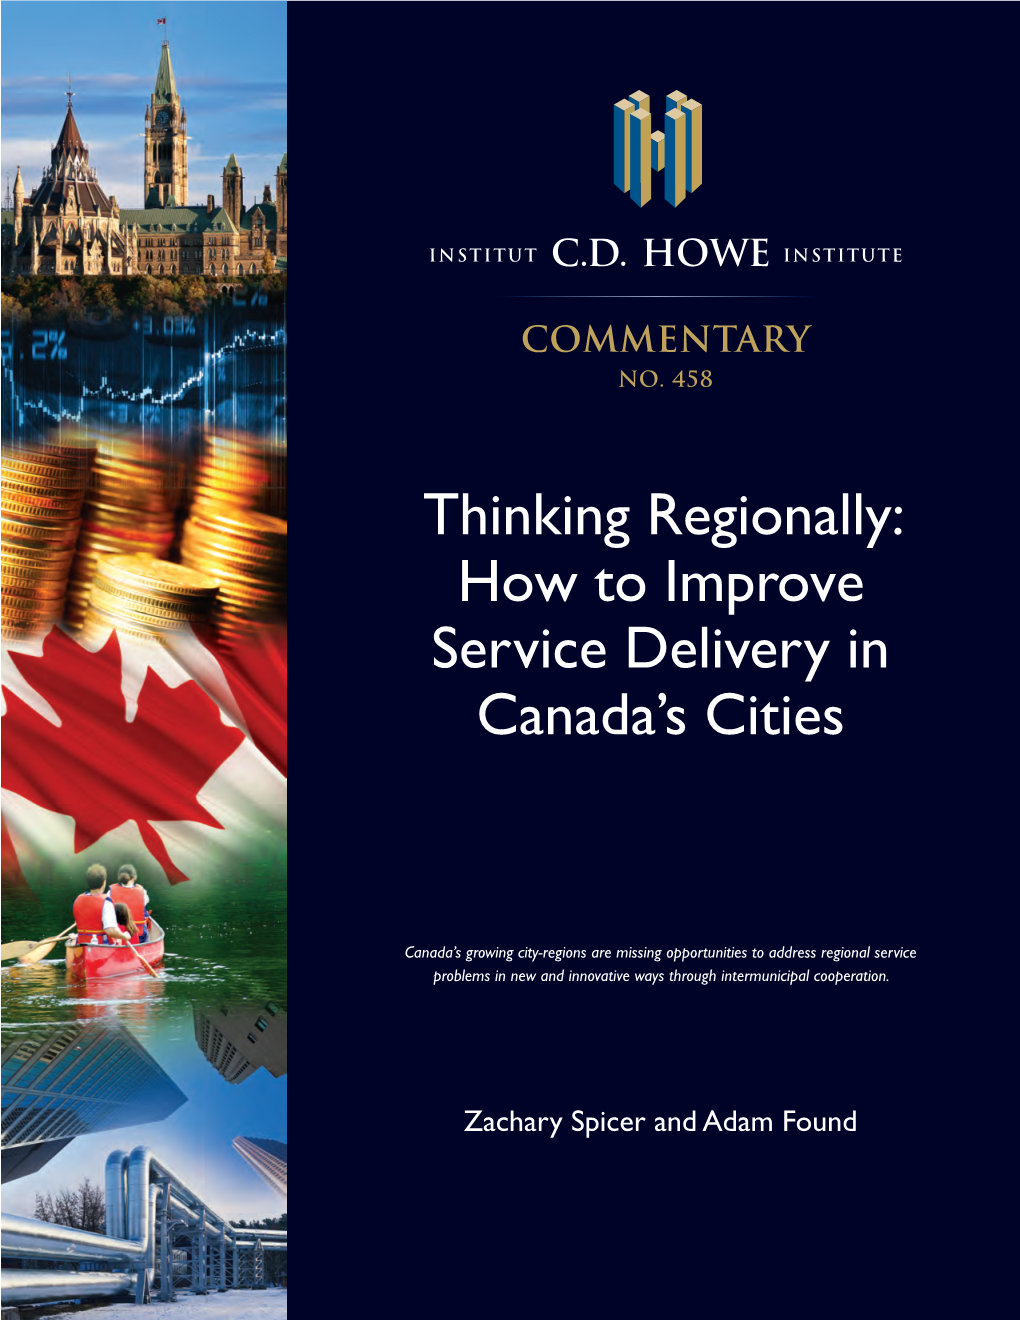 How to Improve Service Delivery in Canada's Cities